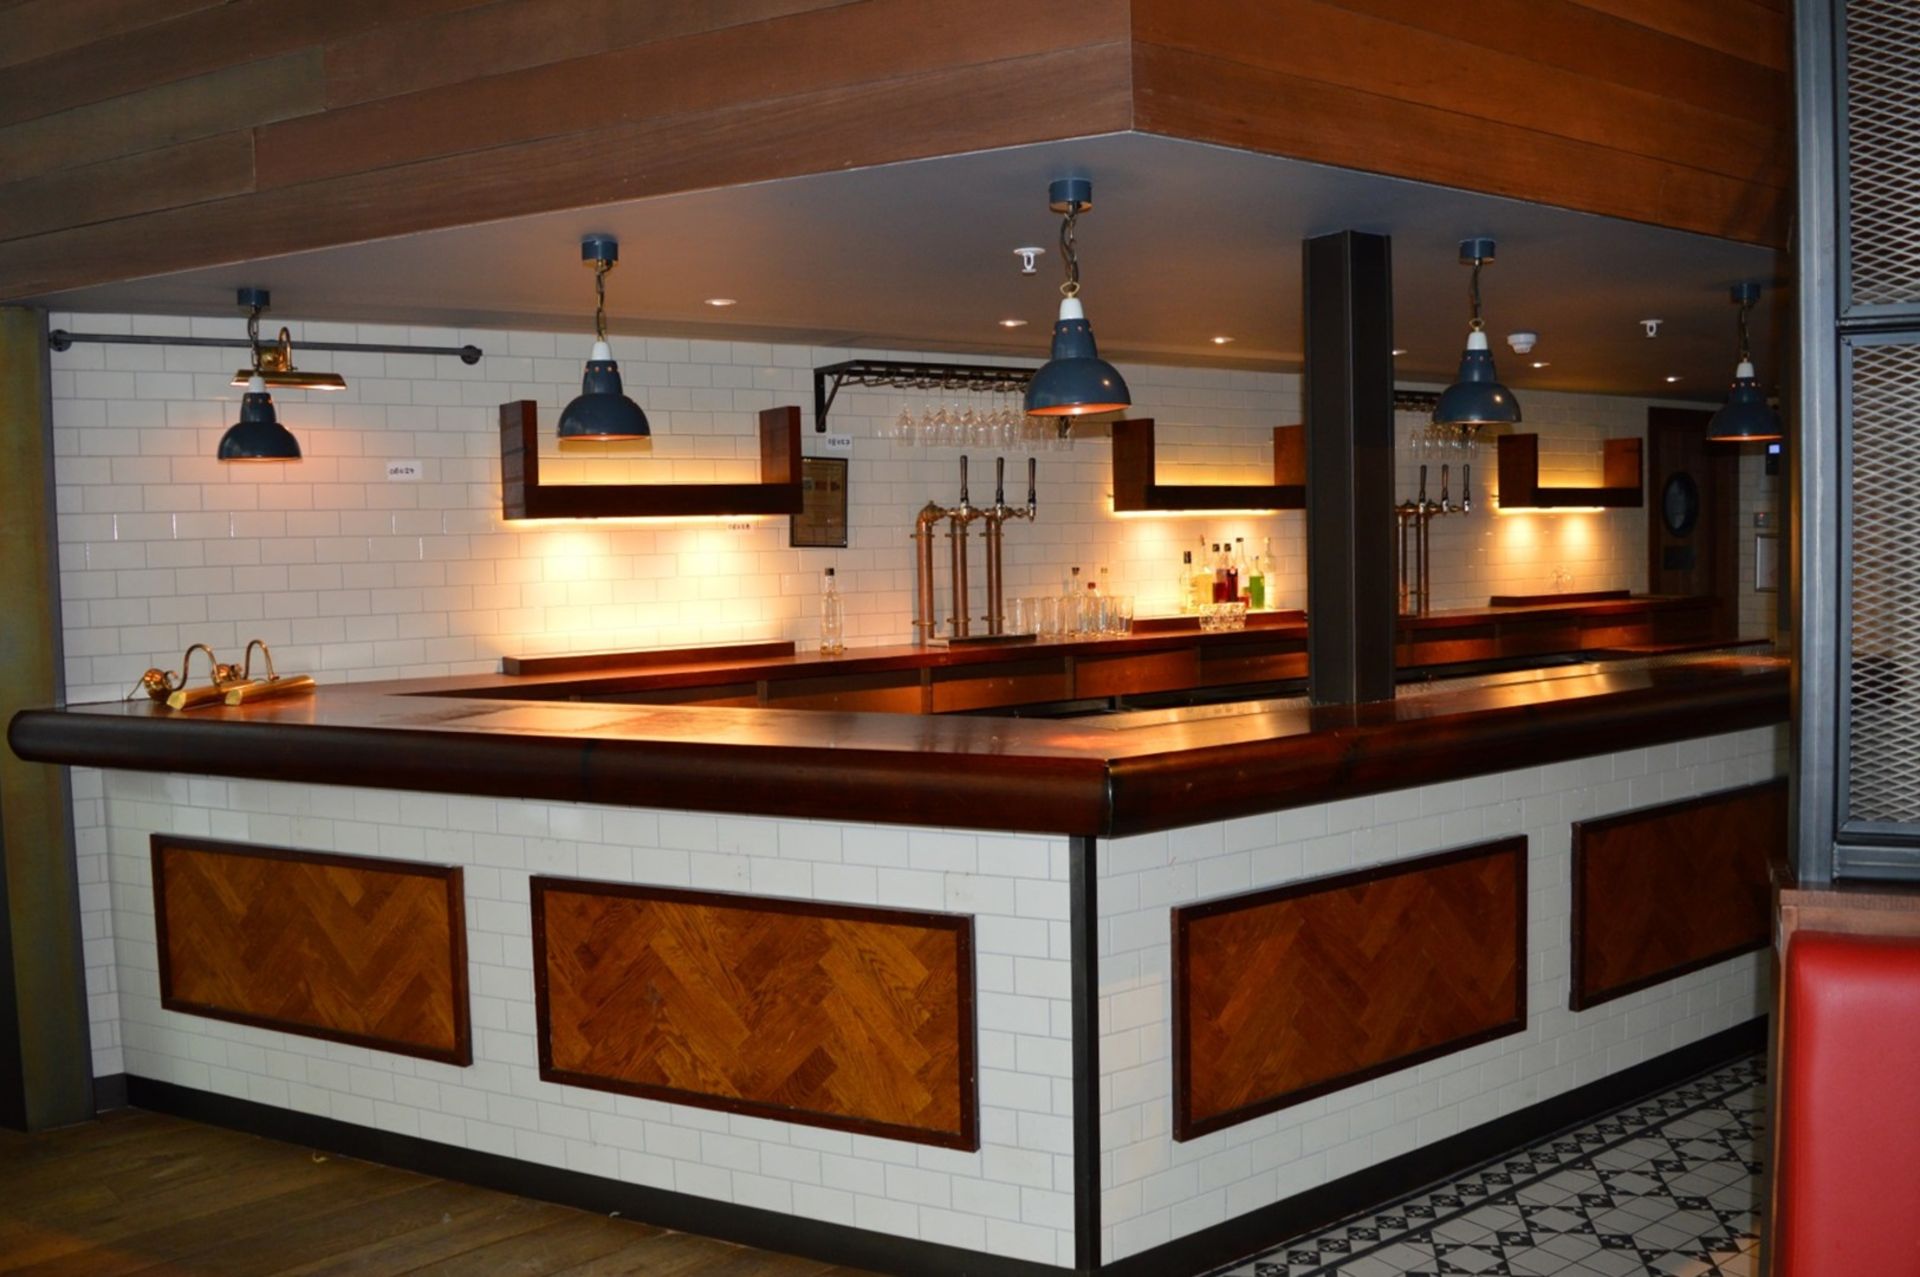 1 x Large Pub / Restuarant Bar With Tiled Front and Framed Parquet Flooring Design - Also Includes - Image 22 of 25